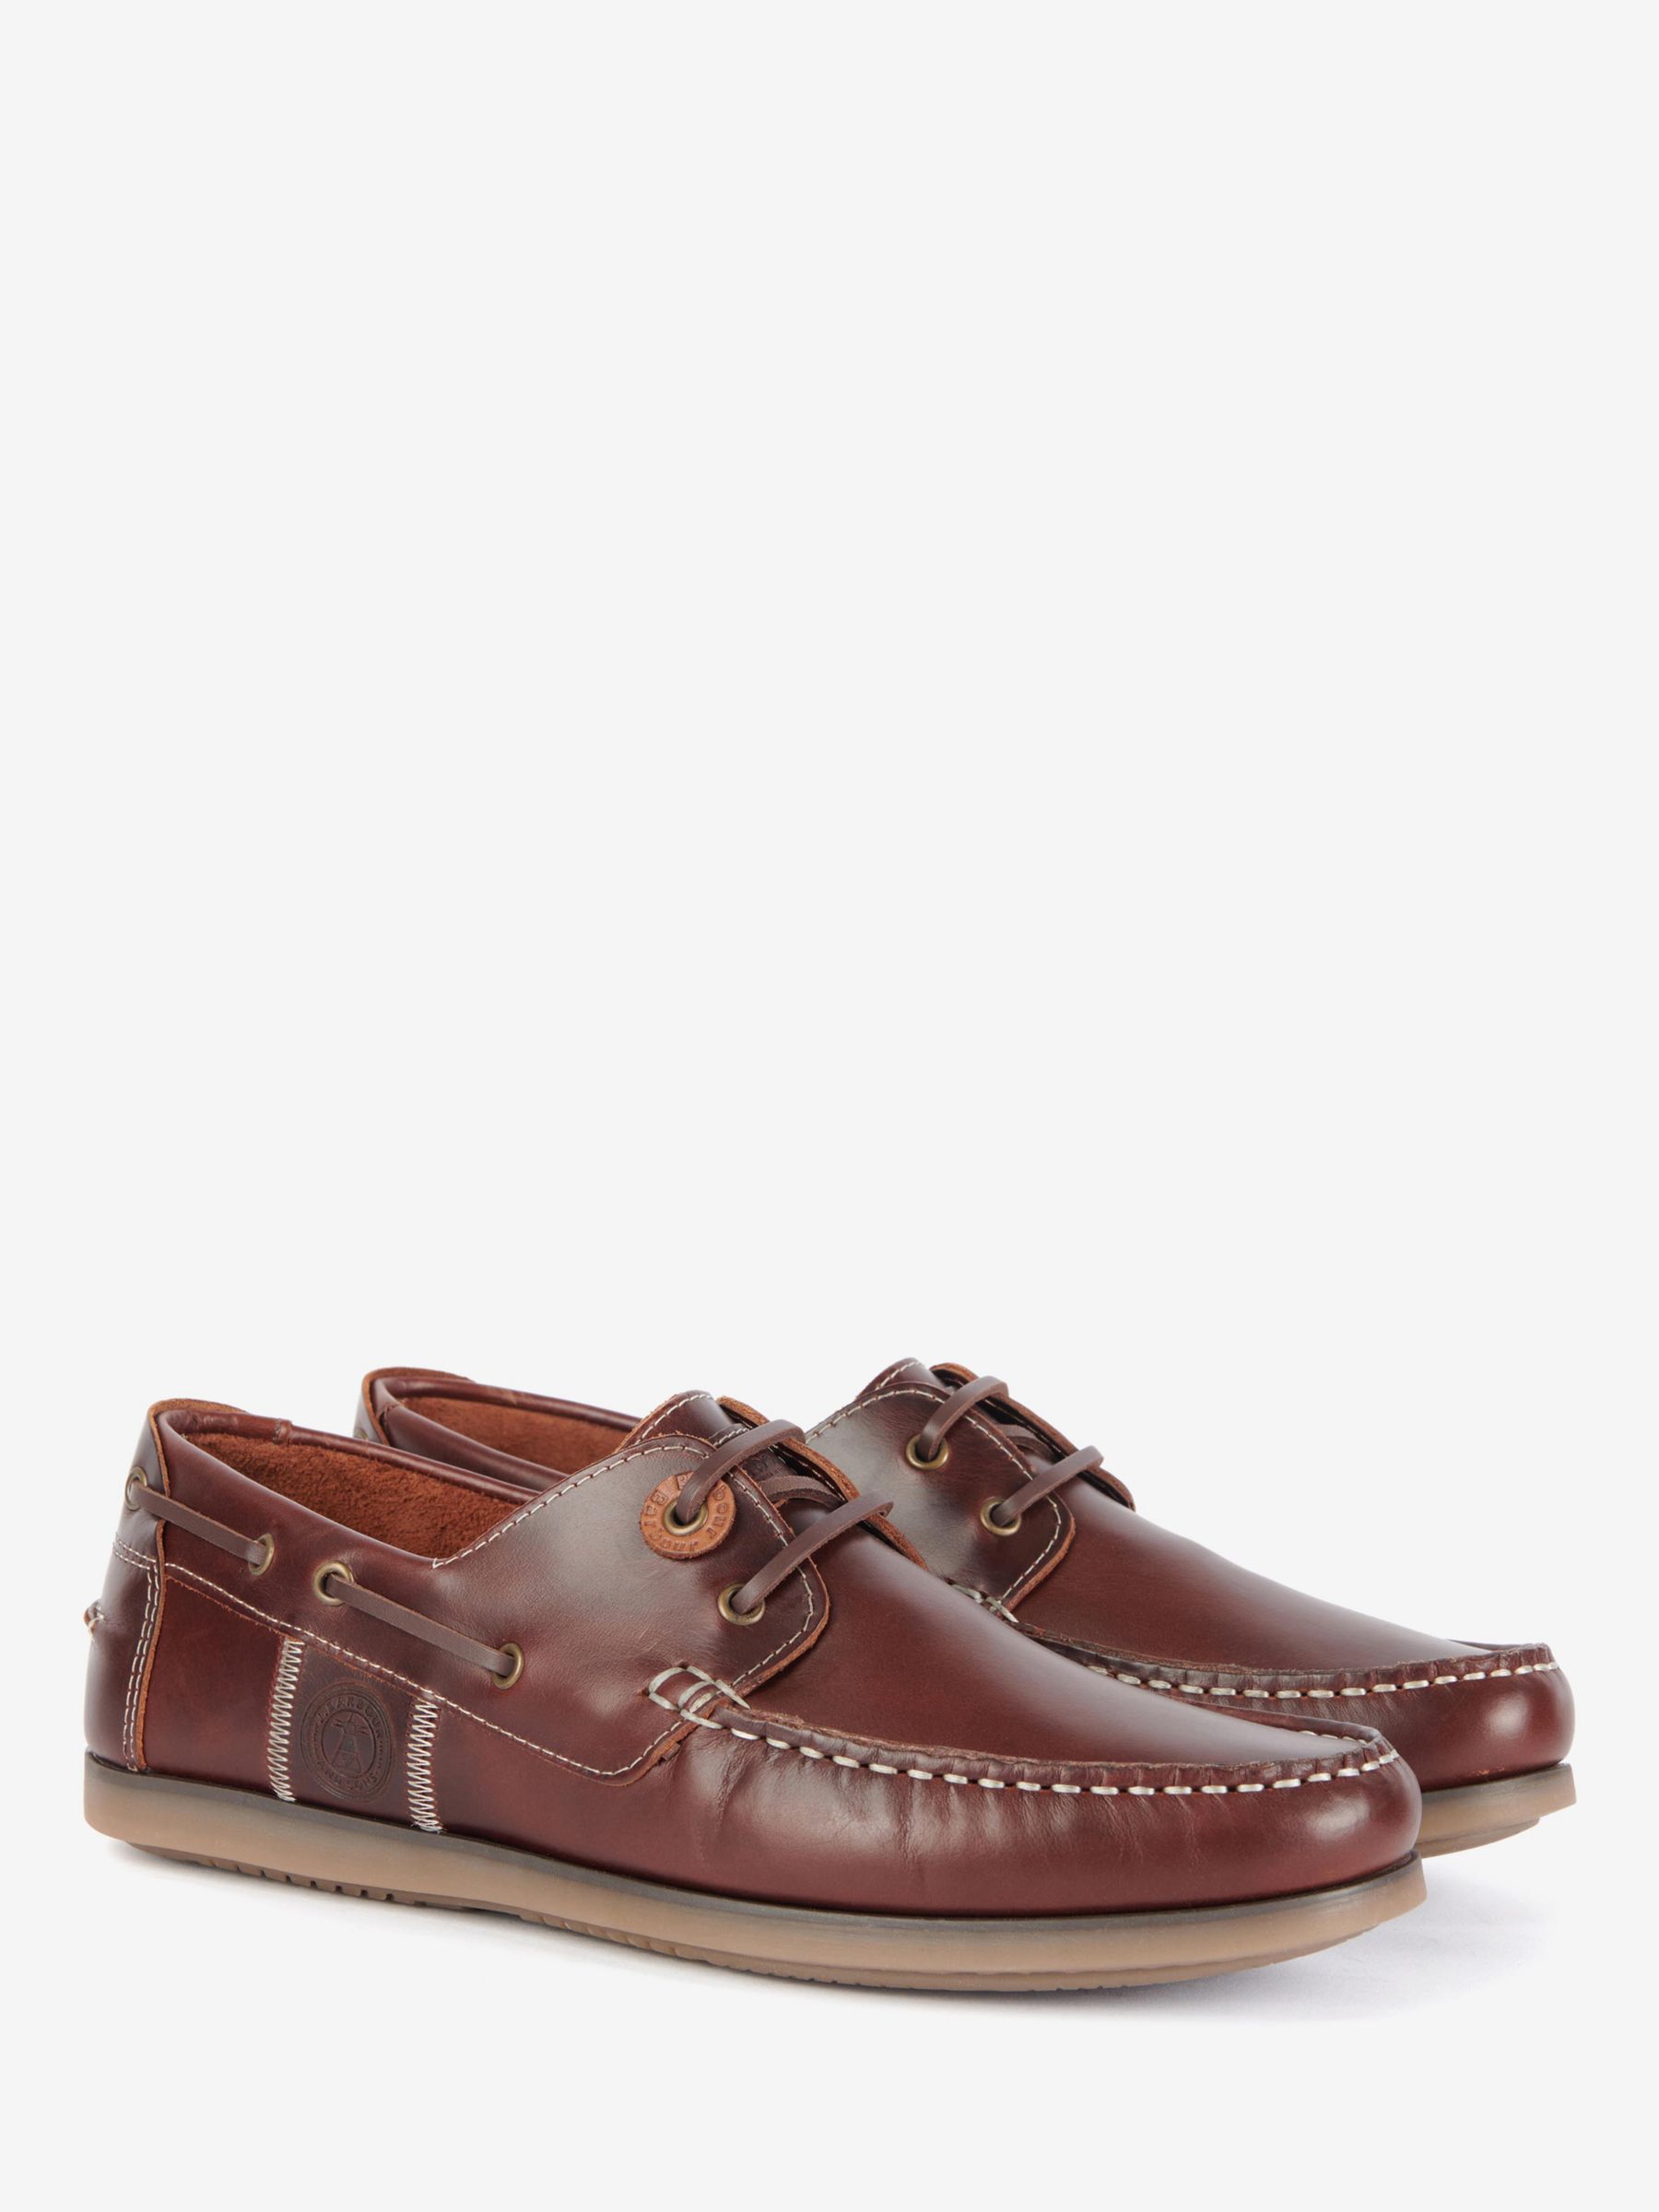 Barbour Wake Leather Boat Shoes, Mahogany, 7